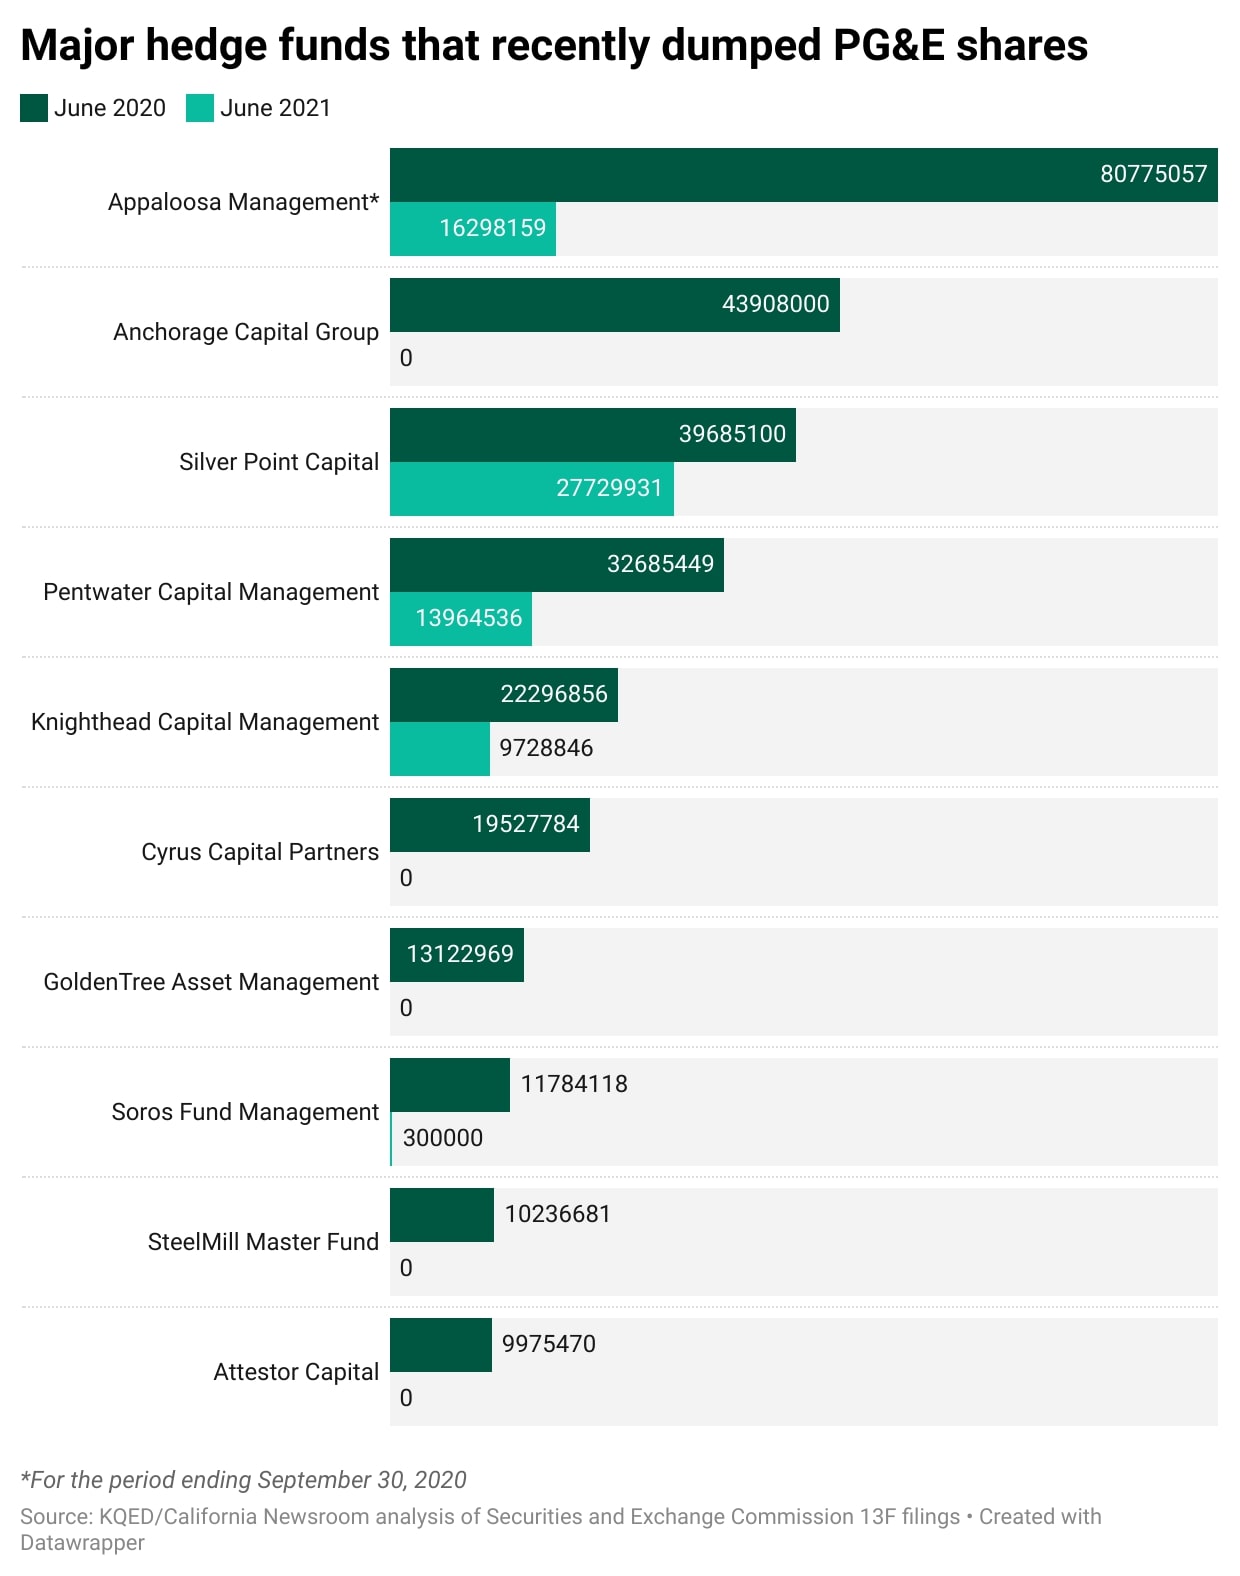 A graphic shows various hedge funds dumping PG&E shares, including Appaloosa Management, Anchorage Capital Group, and others.